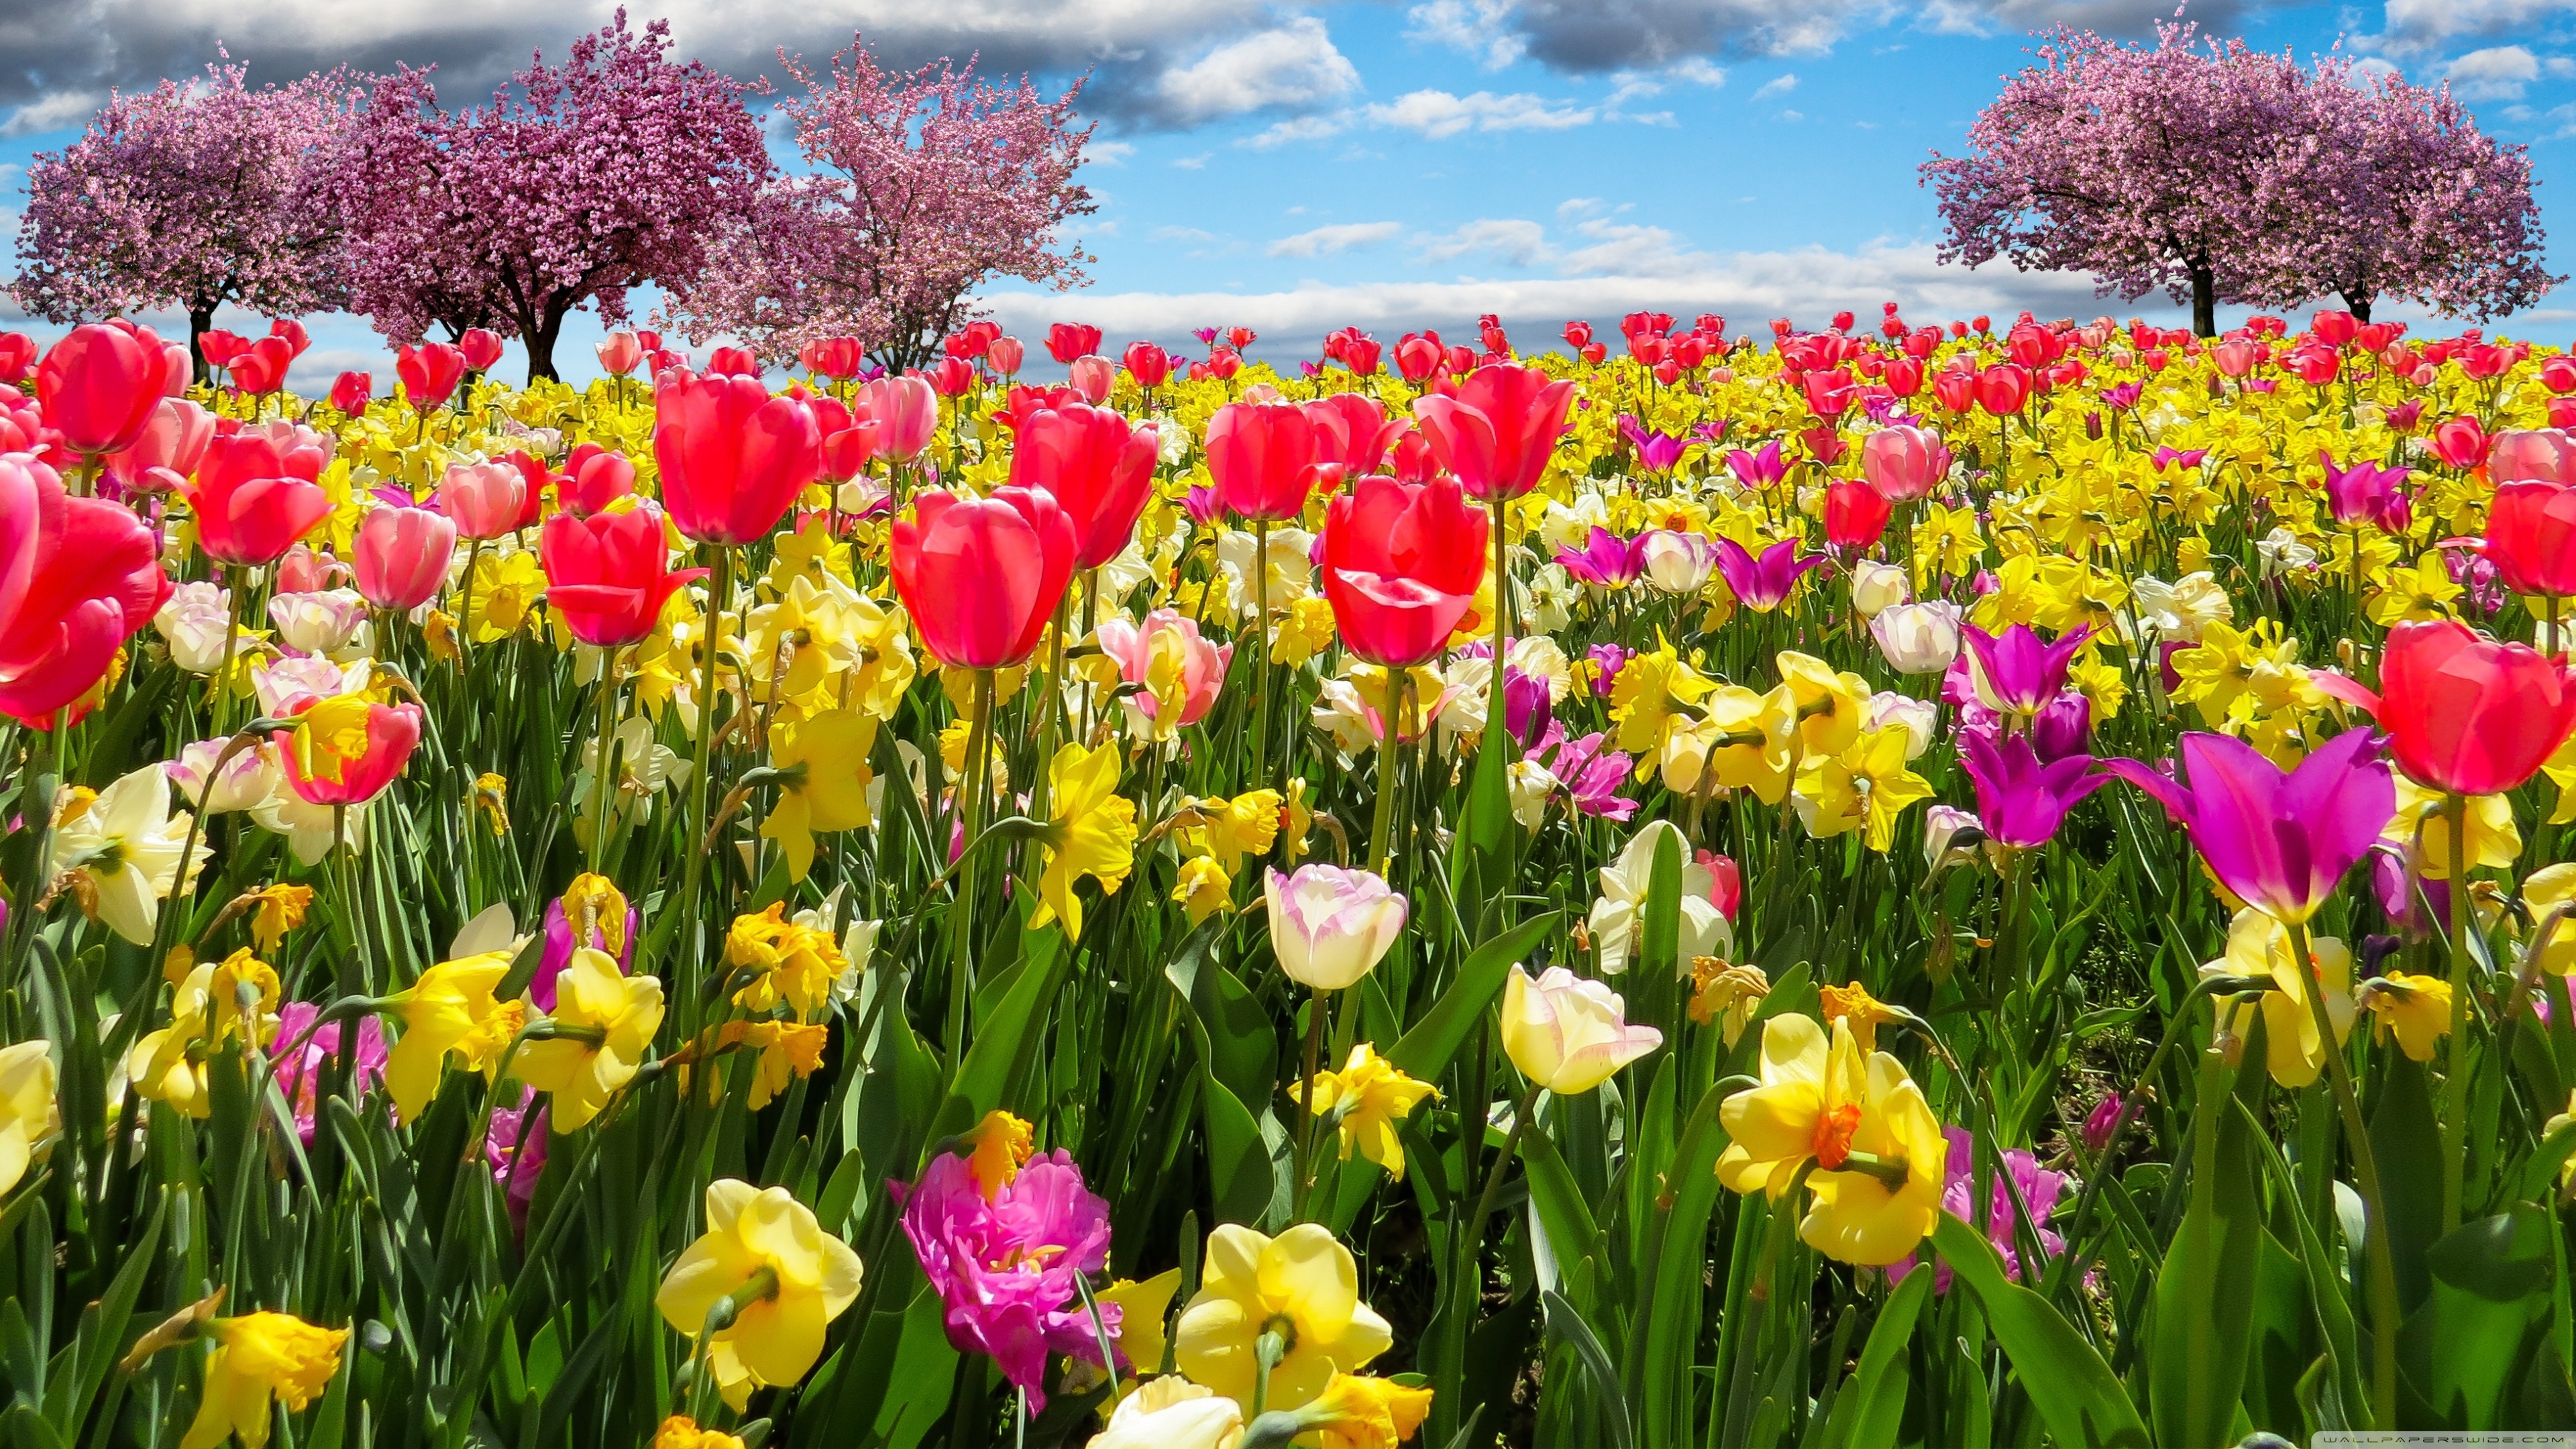 spring_trees_and_flowers-wallpaper-3840x2160.jpg